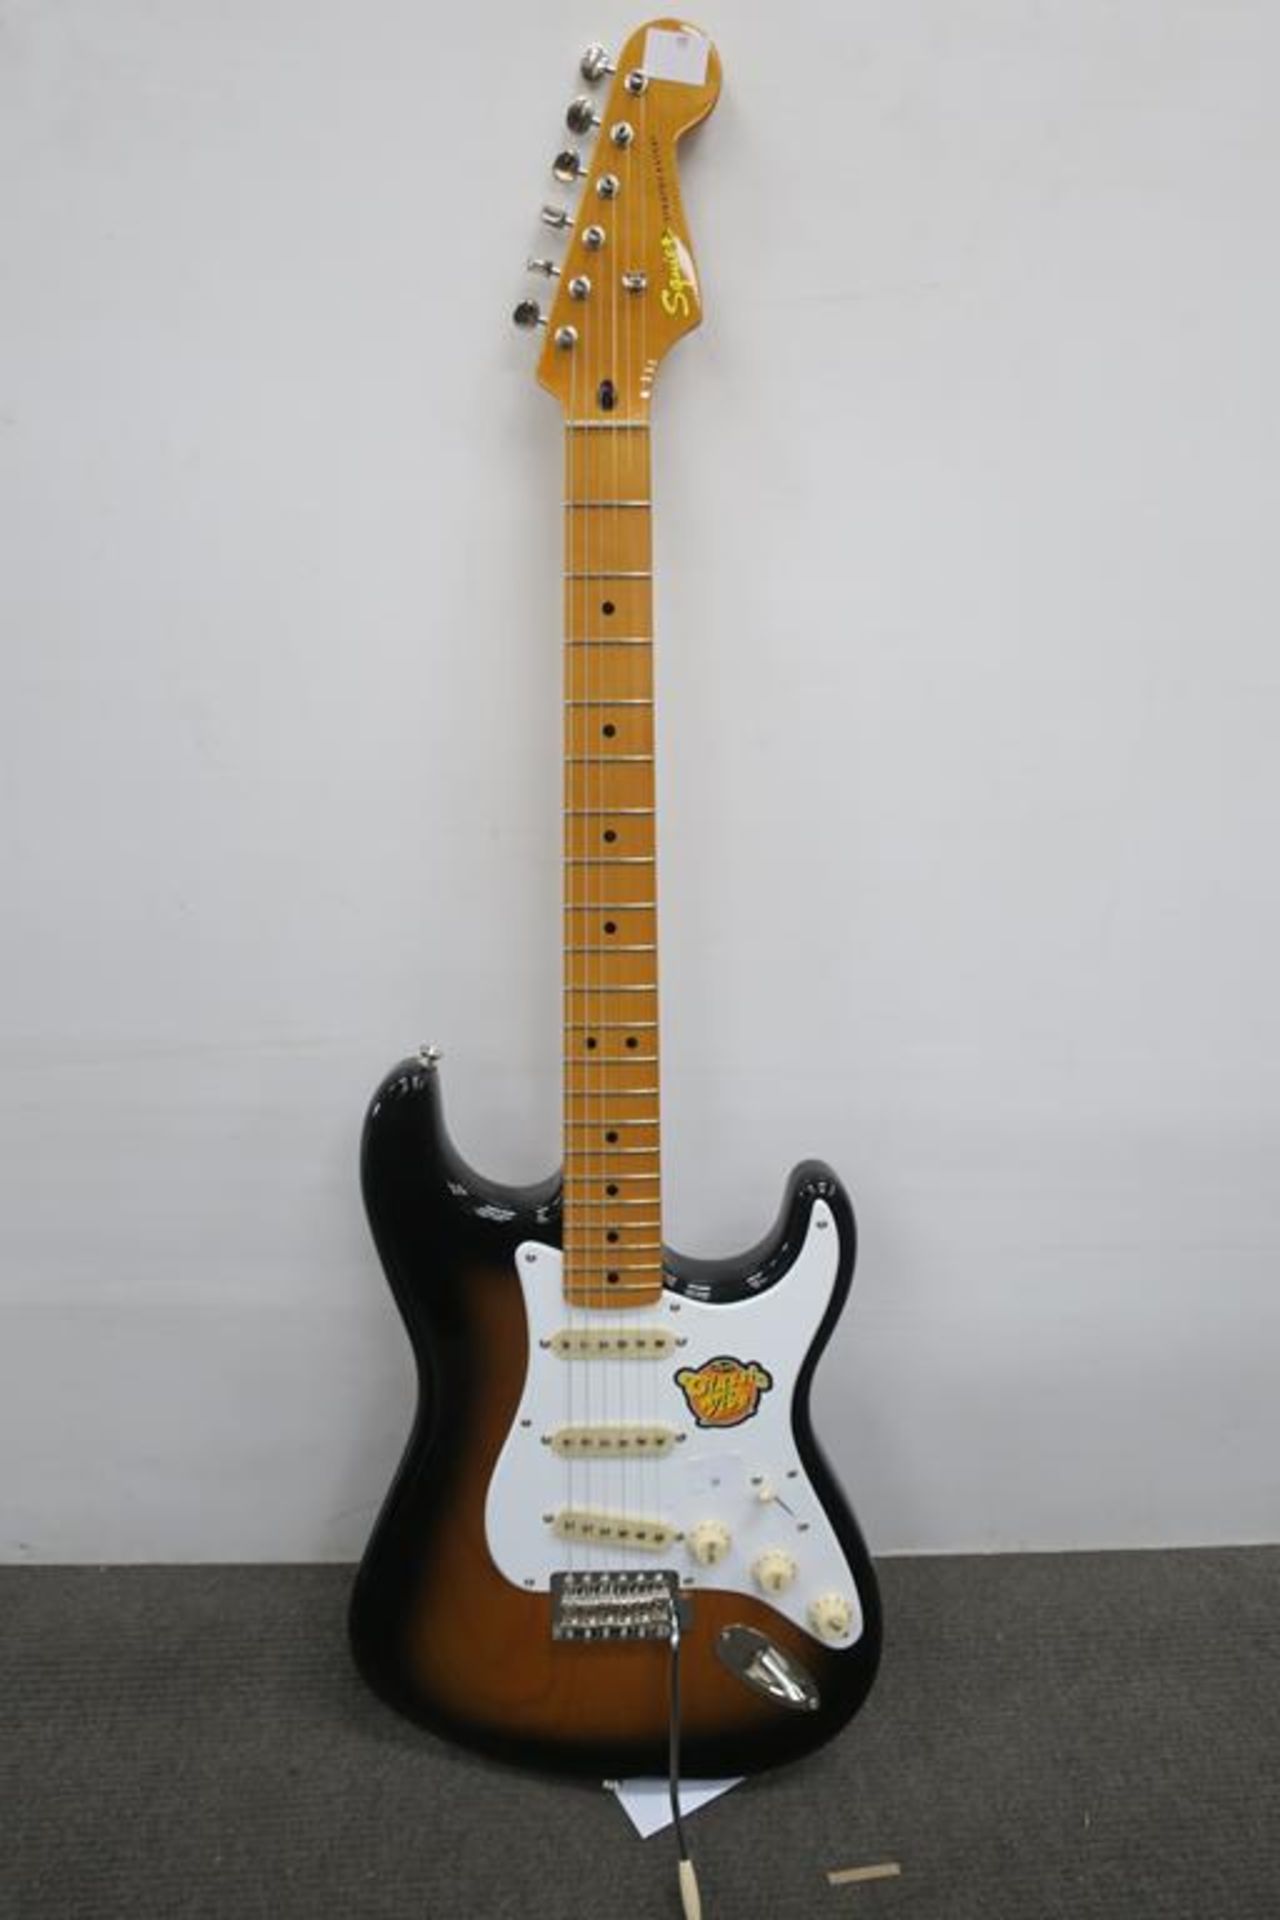 Squier Classic Stratocaster - Image 4 of 4